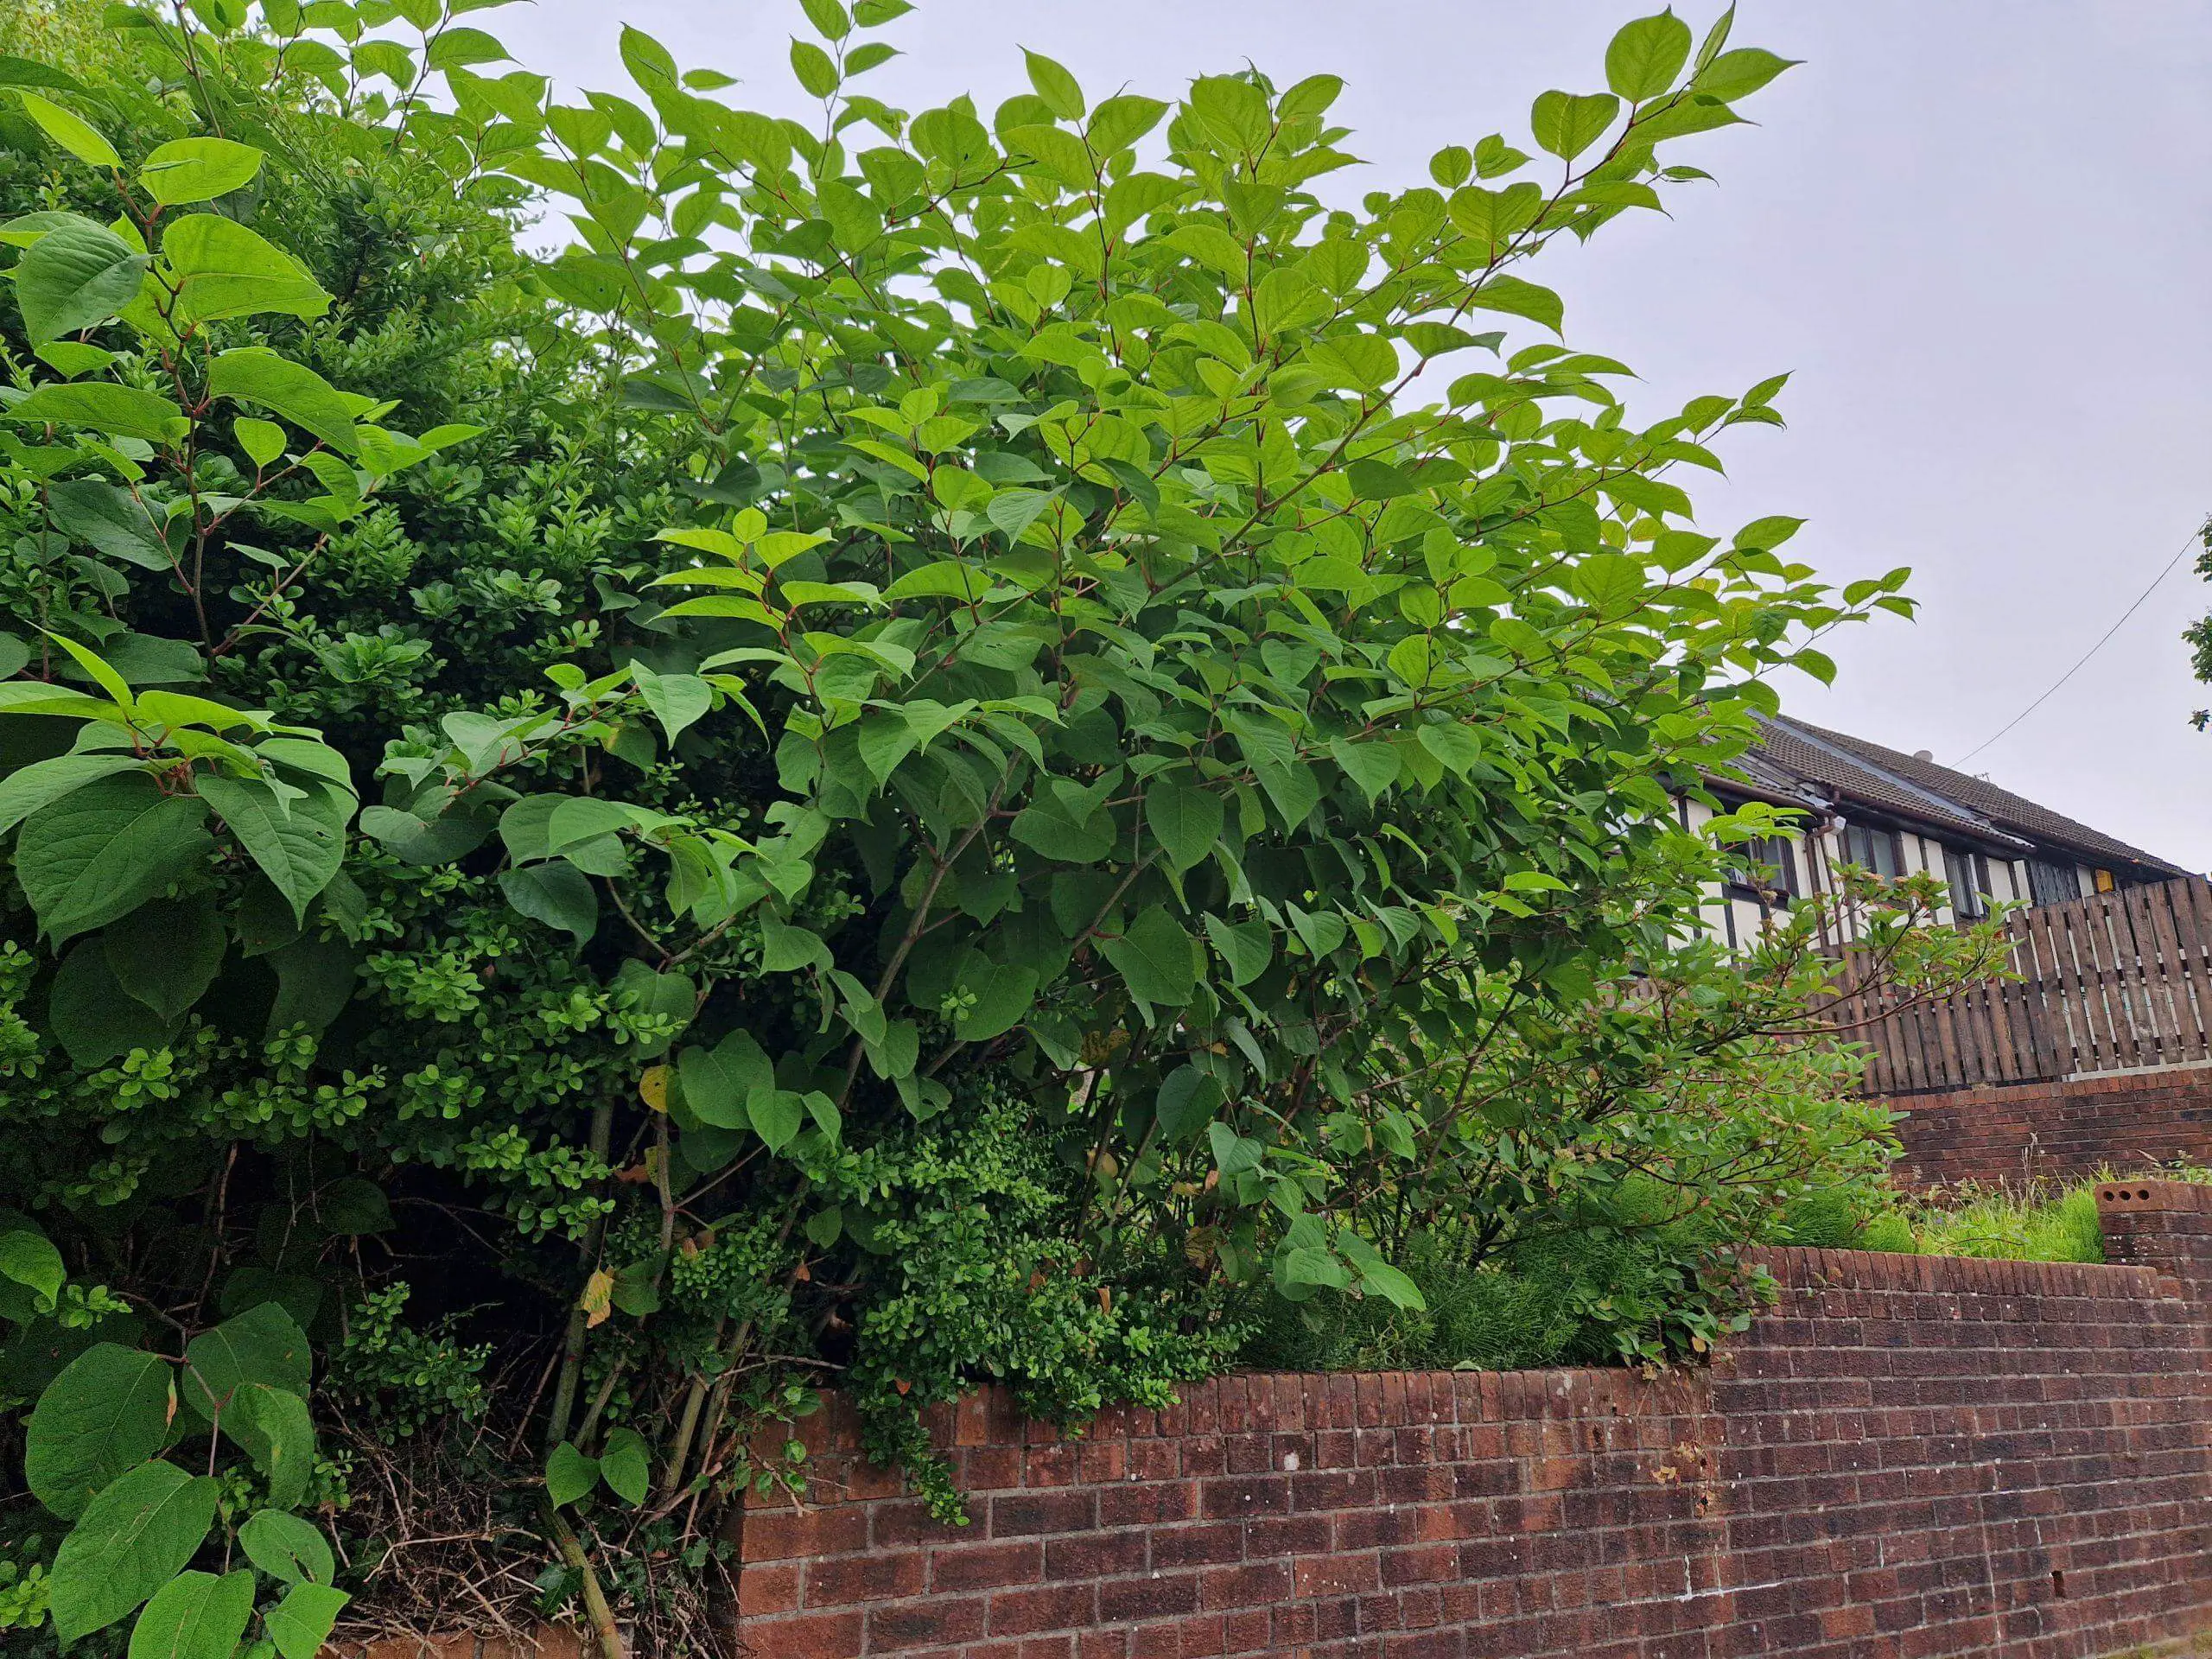 The need to identify Japanese knotweed is essential in order to act fast in removing it